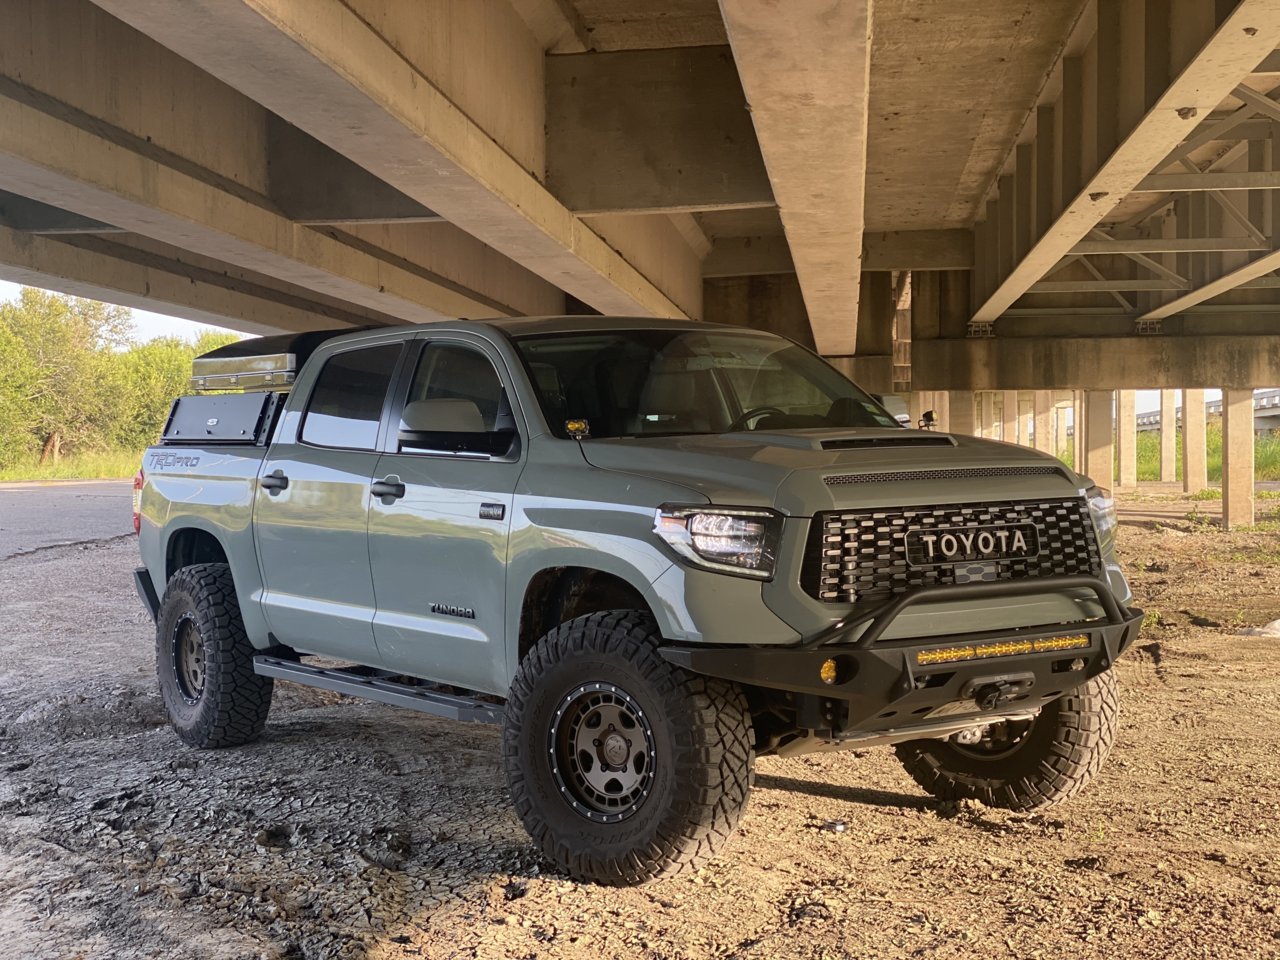 Trd pro and off road/ black steel aftermarket bumpers | Toyota Tundra Forum